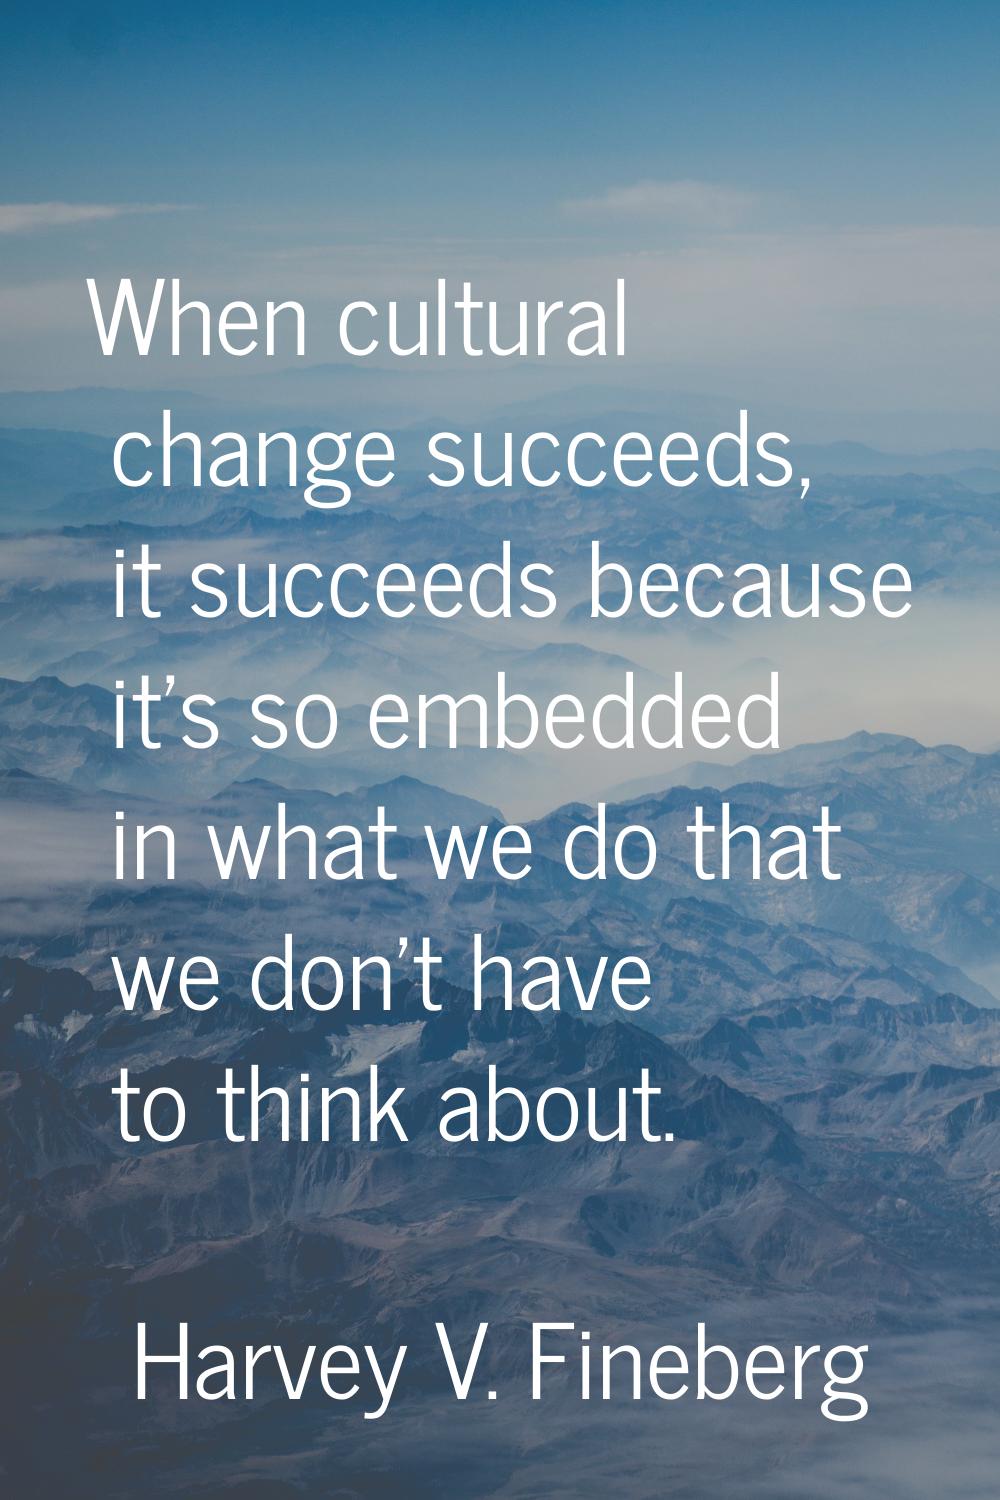 When cultural change succeeds, it succeeds because it's so embedded in what we do that we don't hav